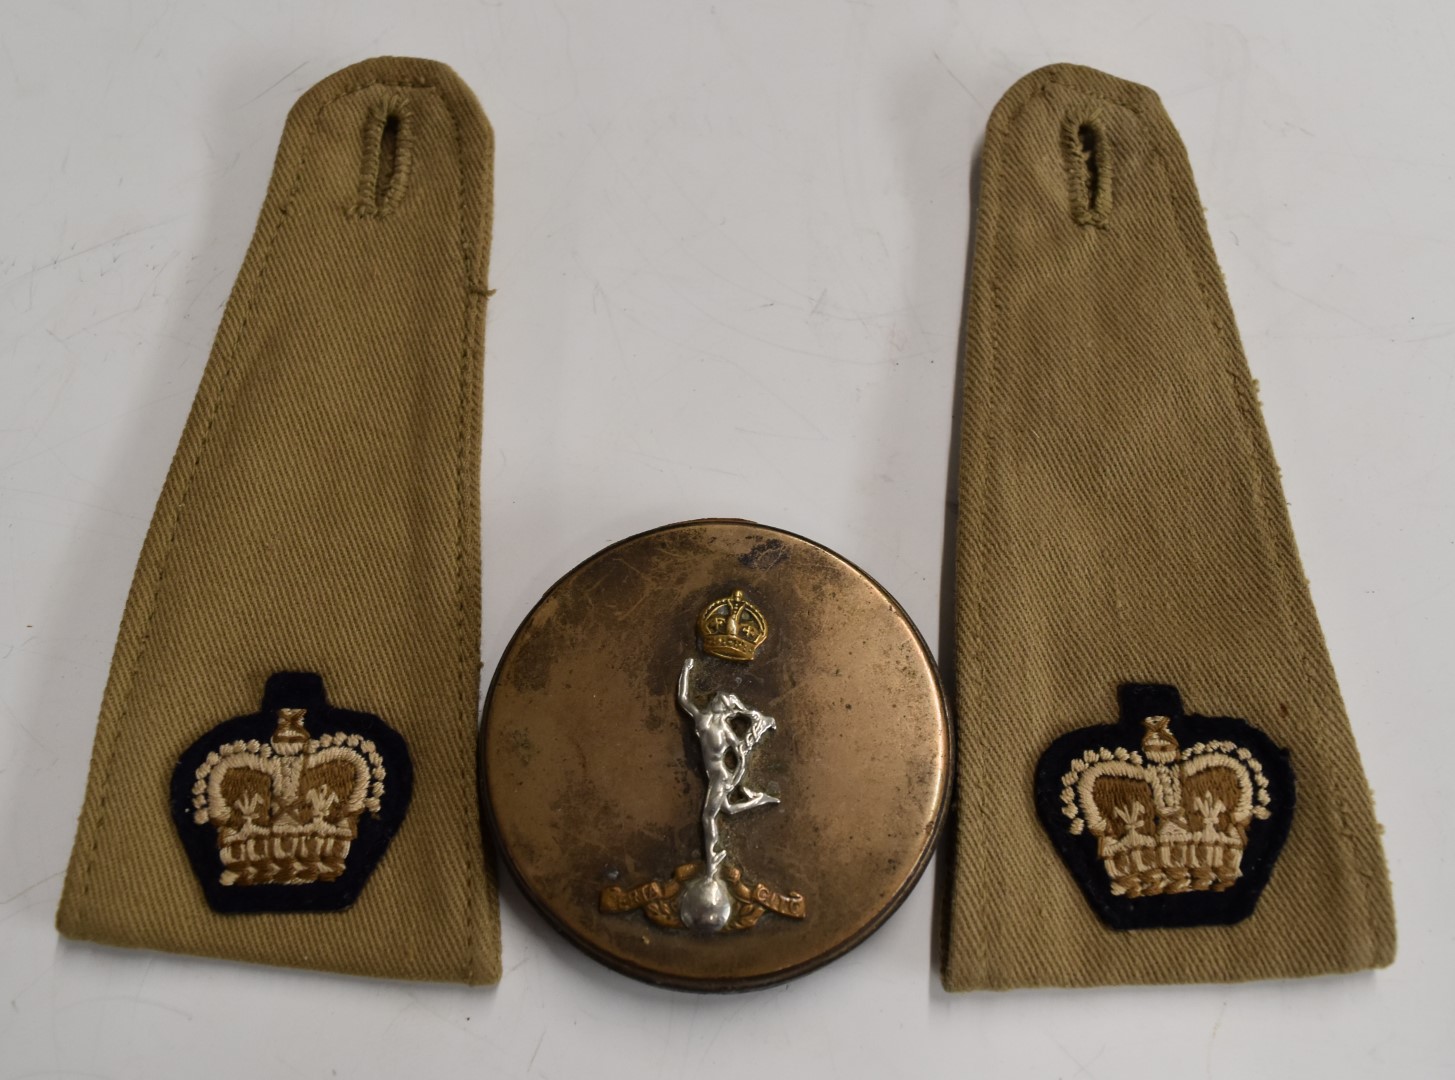 British Army Royal Signals officer's khaki field cap, beret and side hat attributed to Major B H - Image 7 of 9